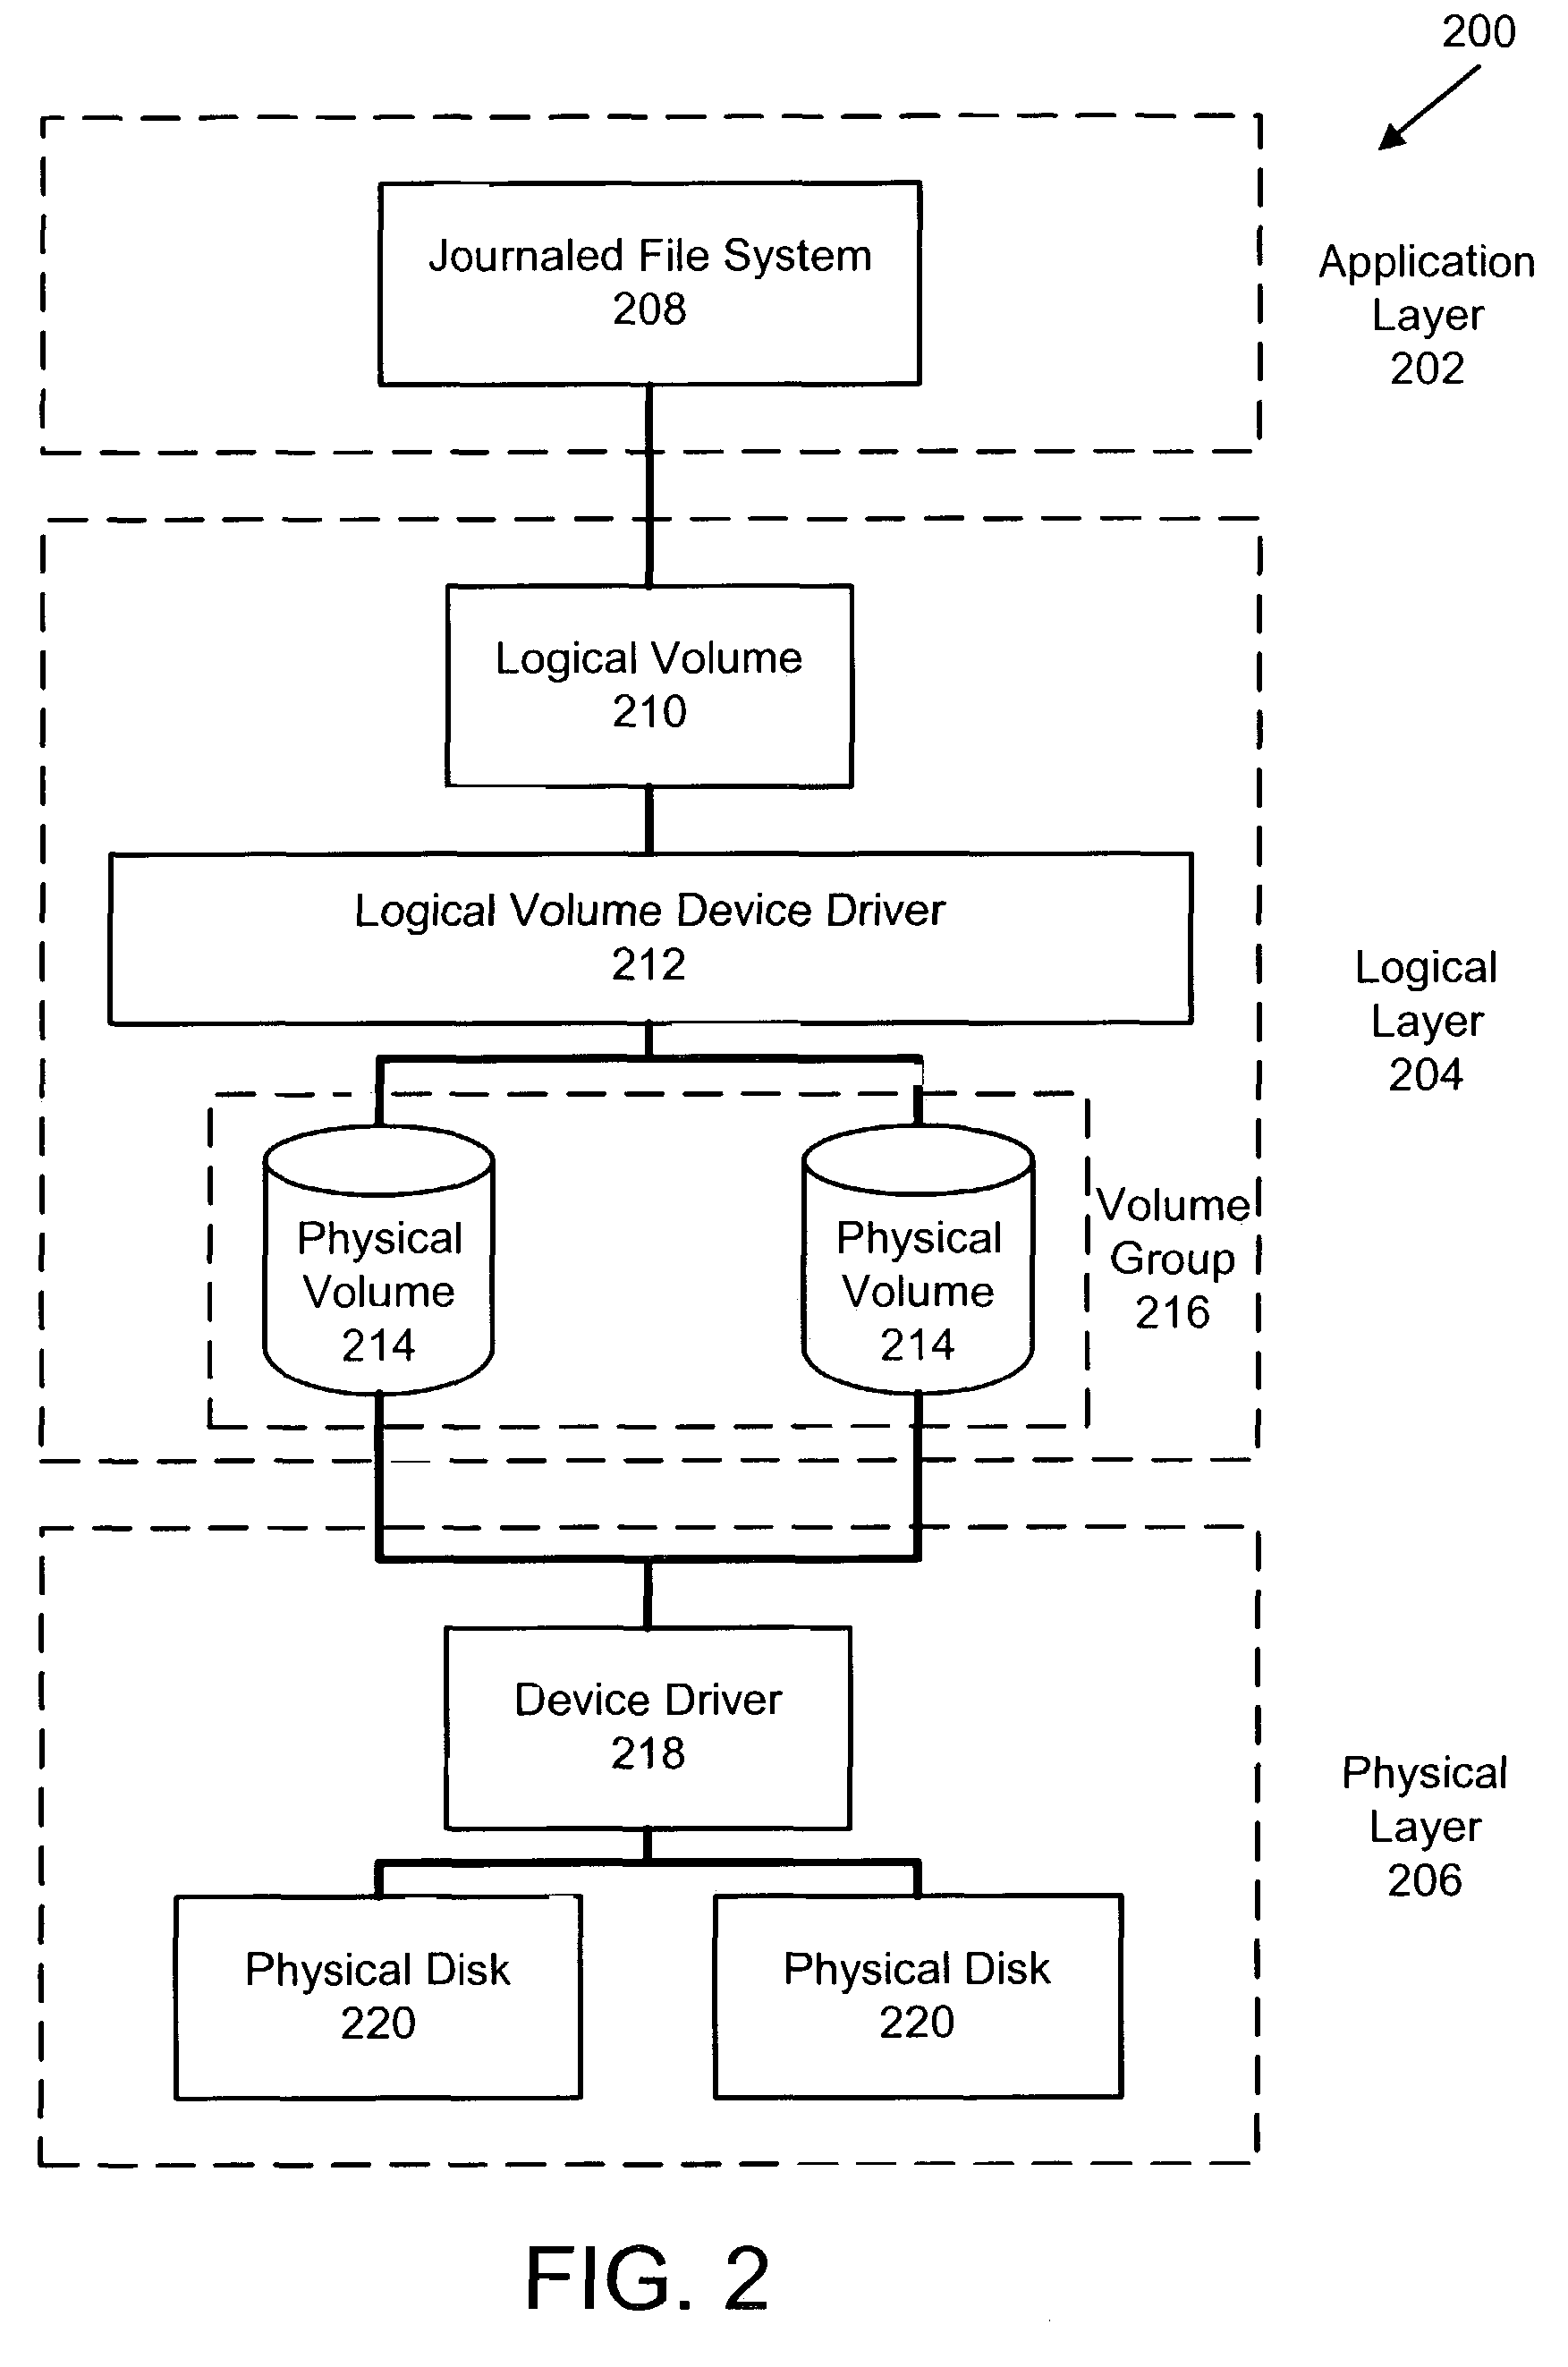 Automatic backup and restore for configuration of a logical volume manager during software installation